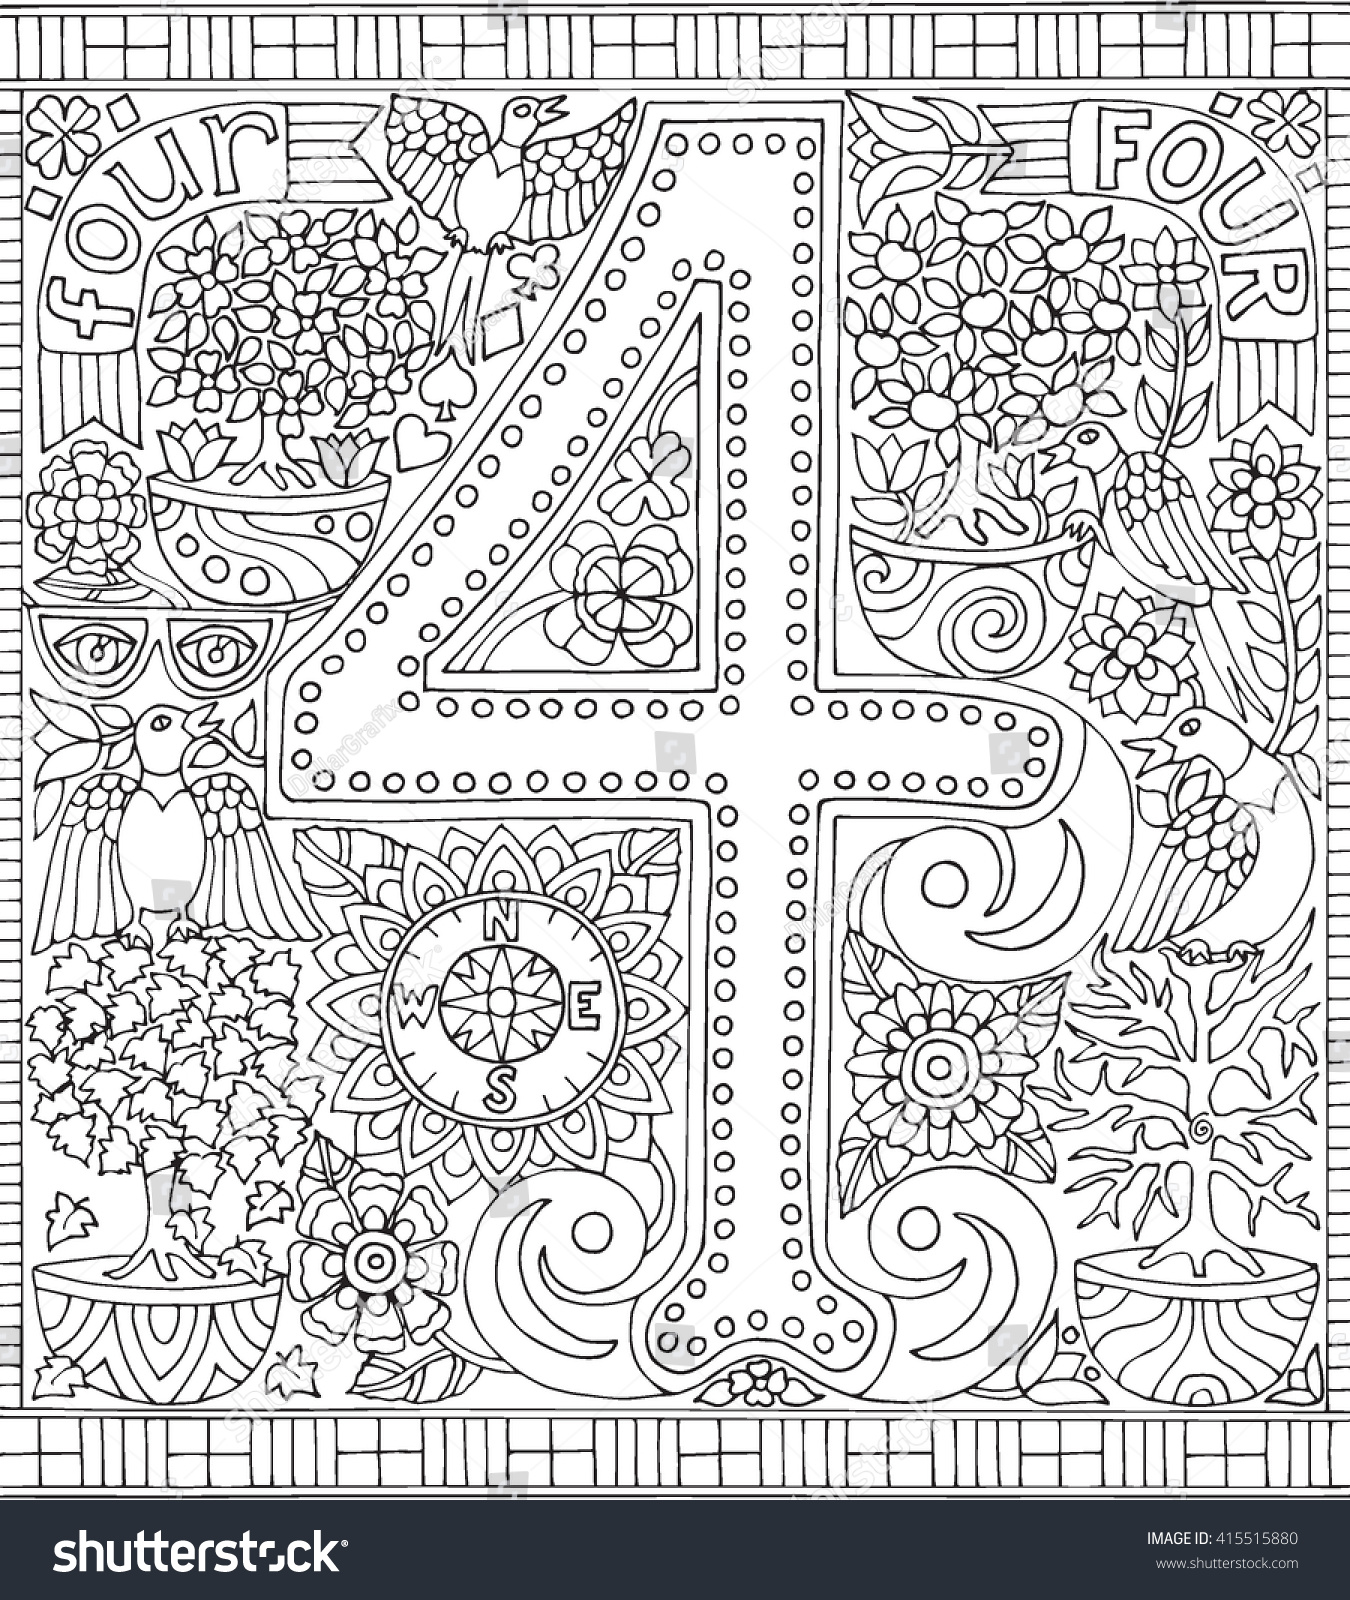 SVG of Number 4 Four Adult Coloring Book Fantasy Sheet for Relaxation Therapy svg